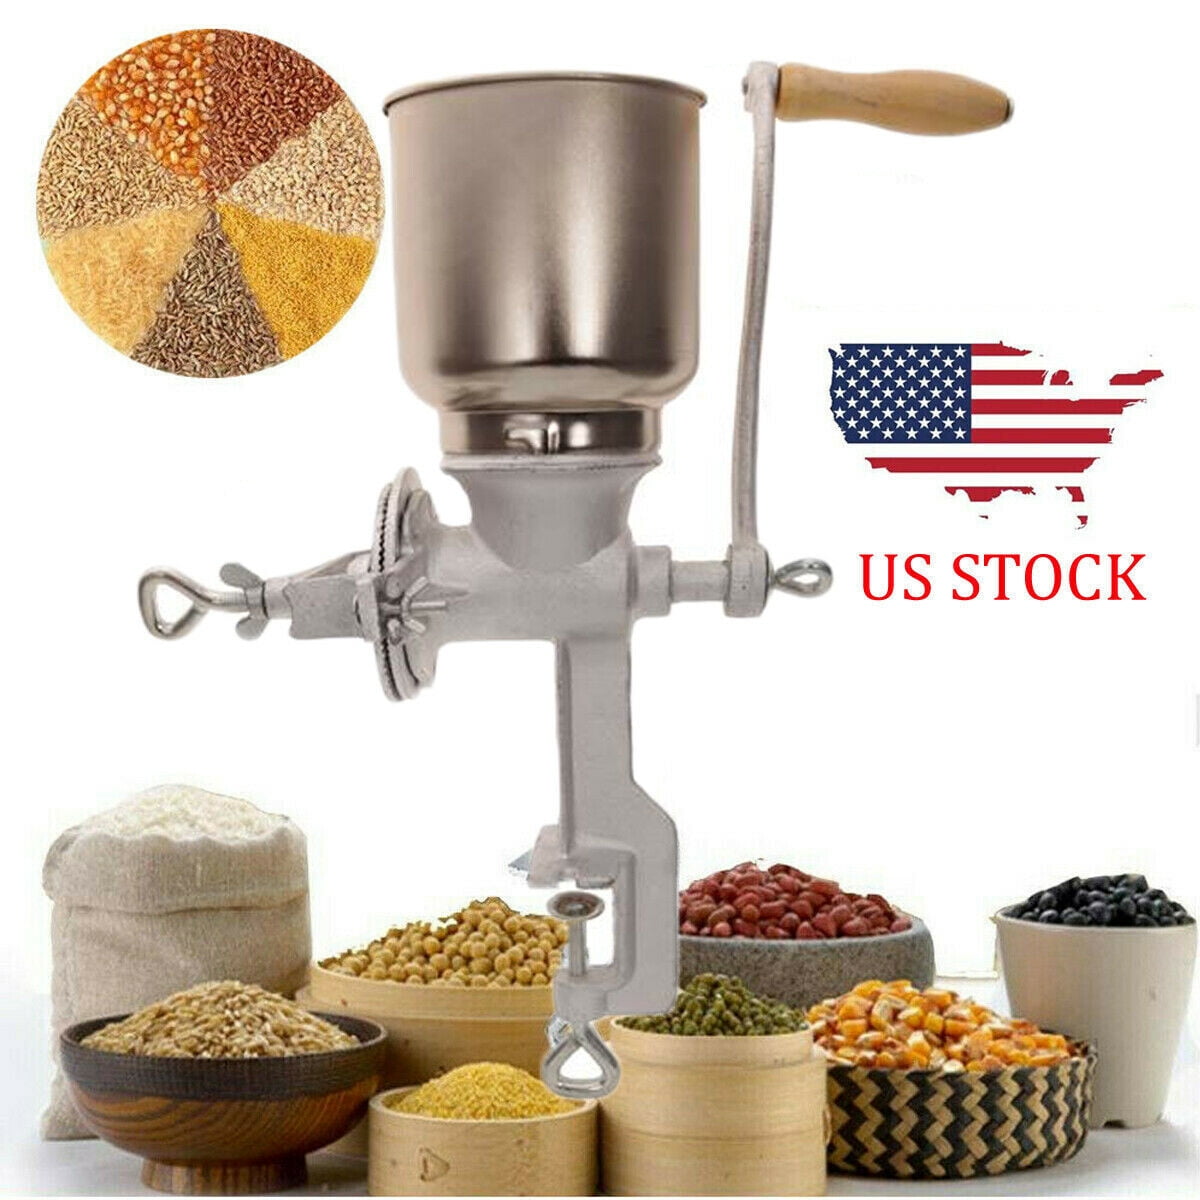 Alpine Cuisine Cast Iron Corn Grinder 17 Inch with High Hopper, Grinder for  Corn Coffee Food Wheat Oats Nuts Spices Seeds Herb Grinder Great for